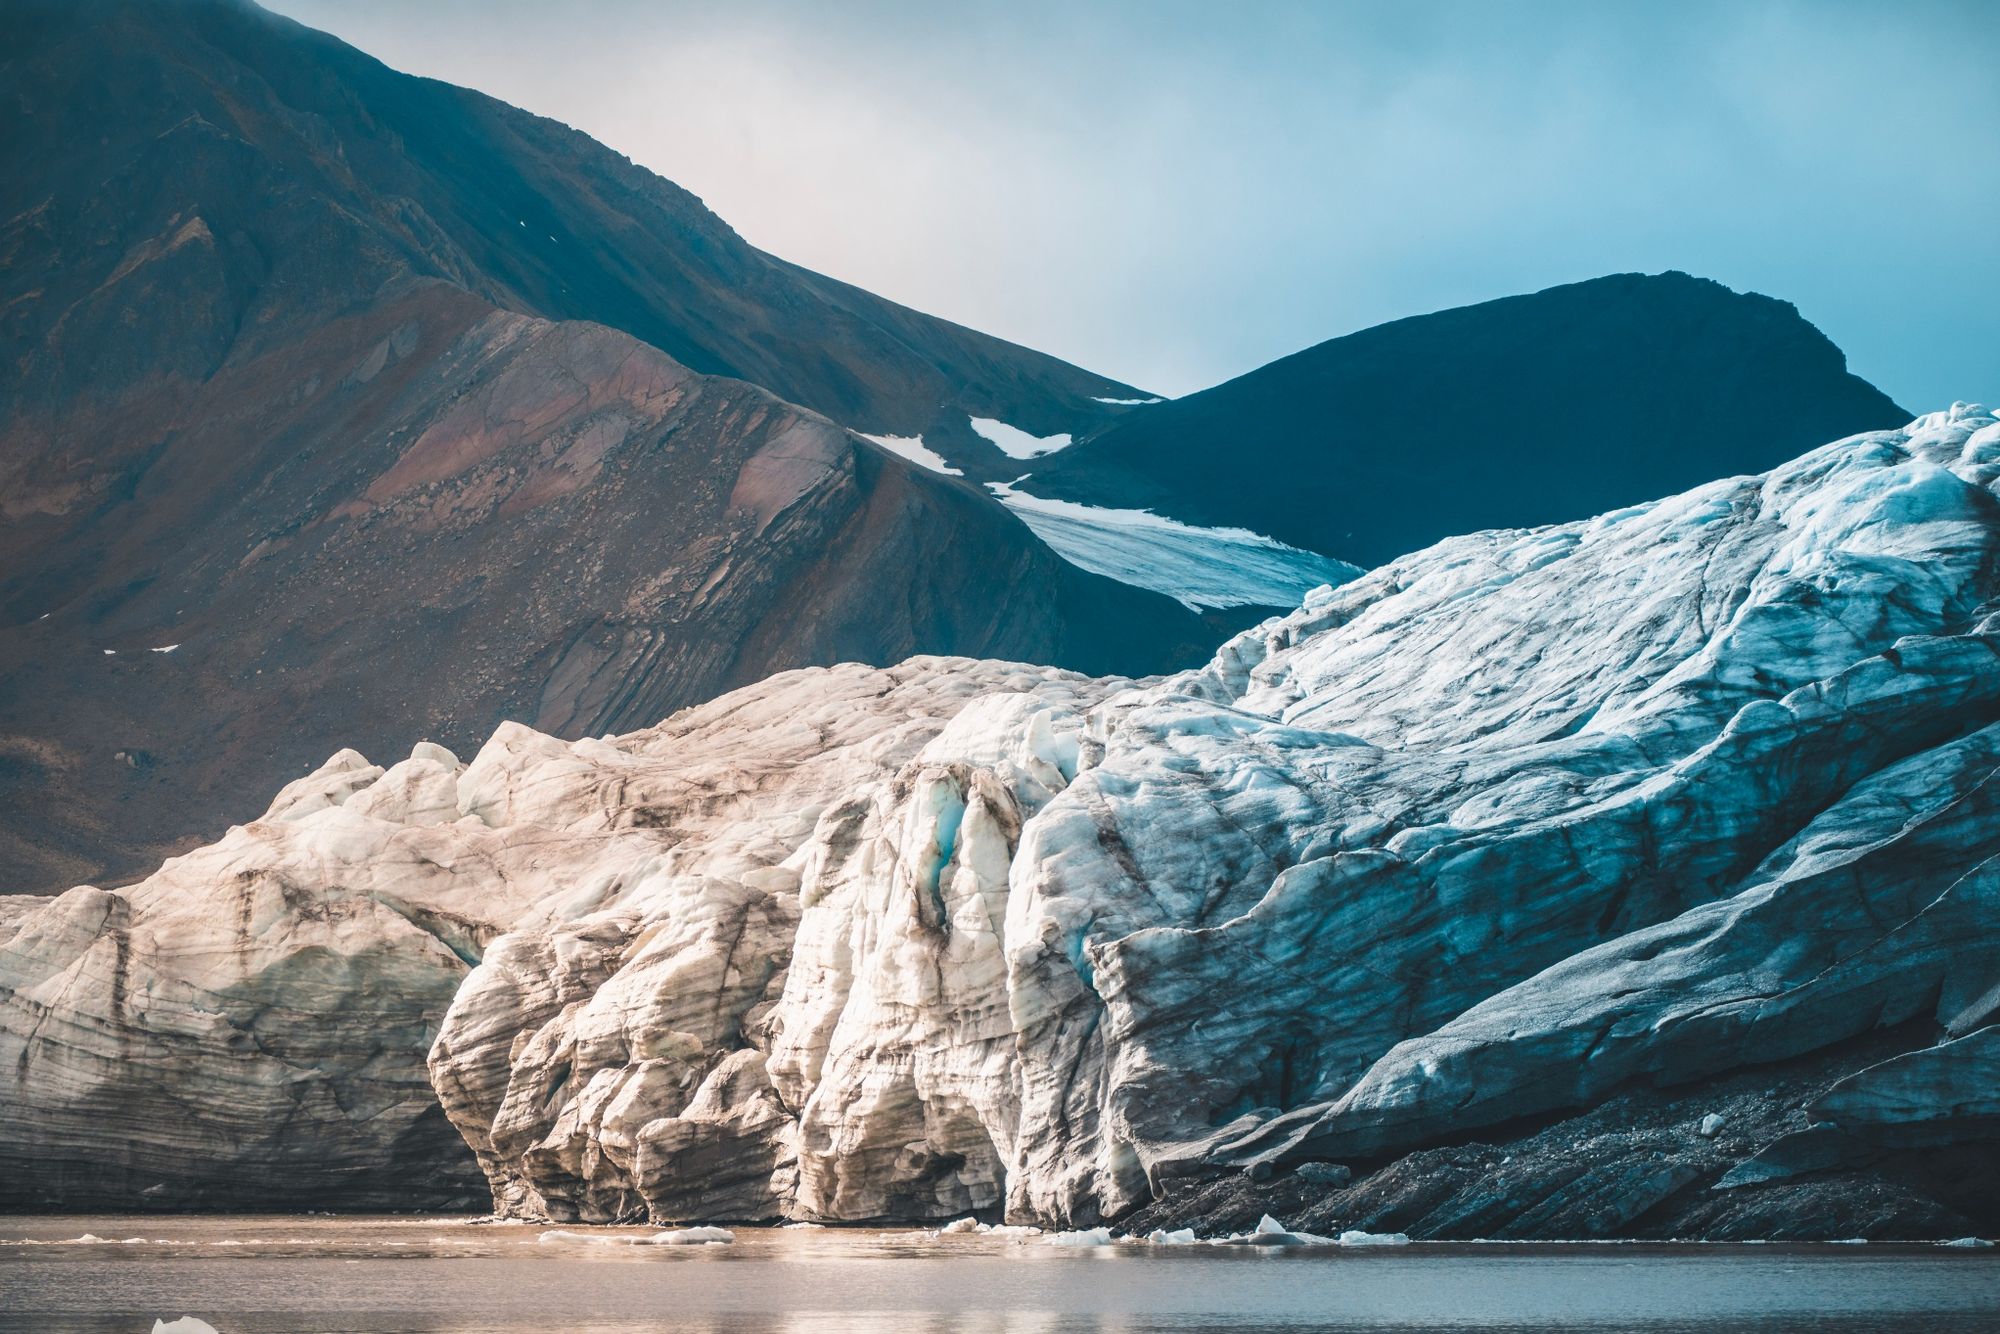 A glacier in front of the dark mountains in Svalbard